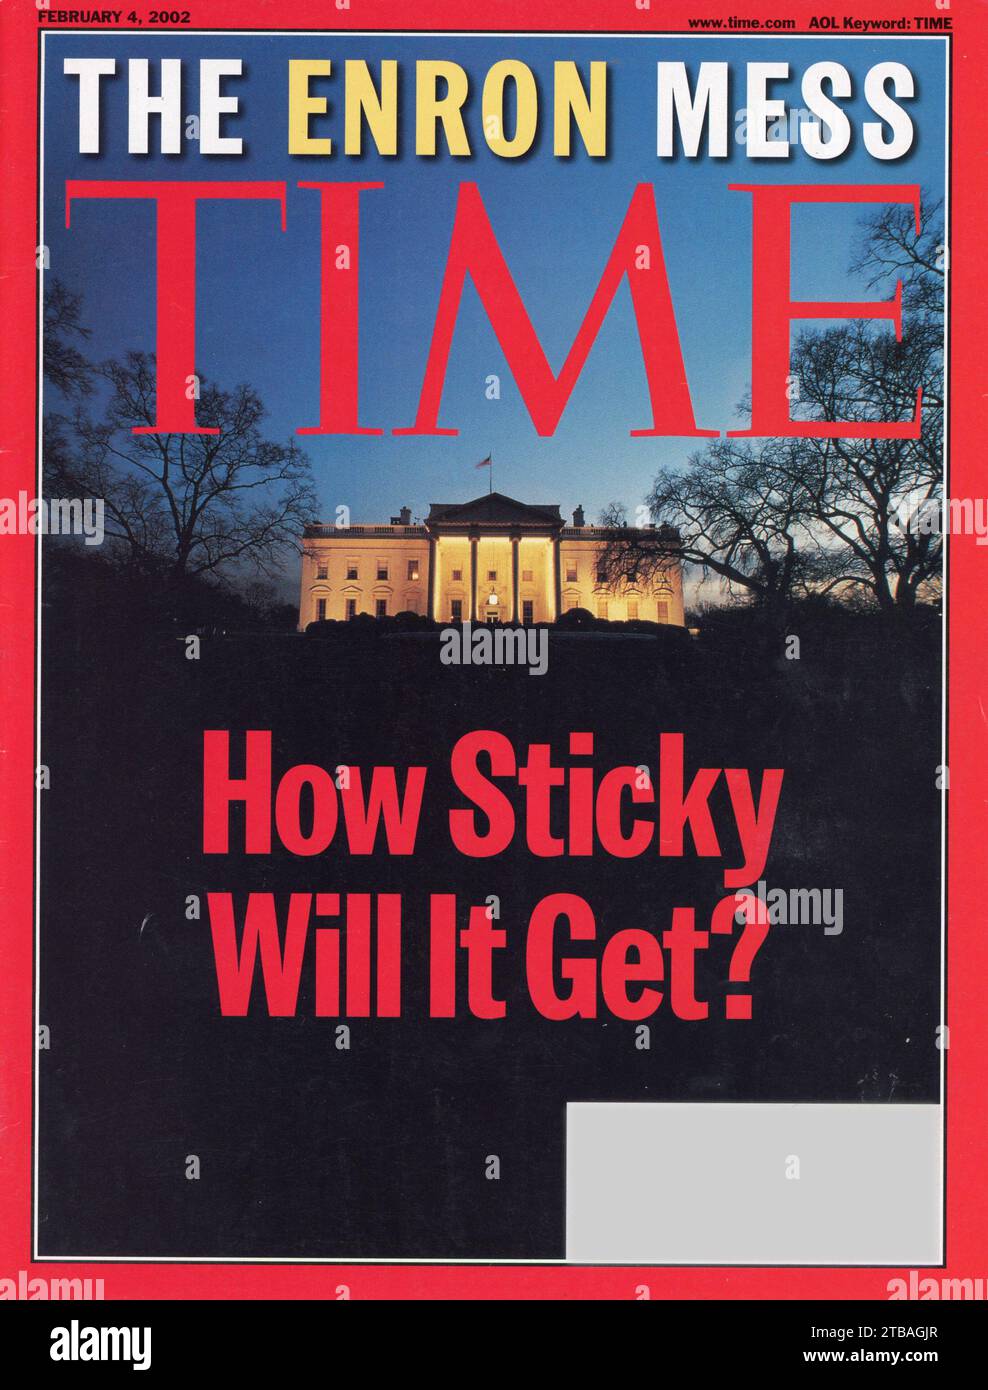 Vintage 'Time' magazine 4 February 2002 issue Cover, USA Stock Photo